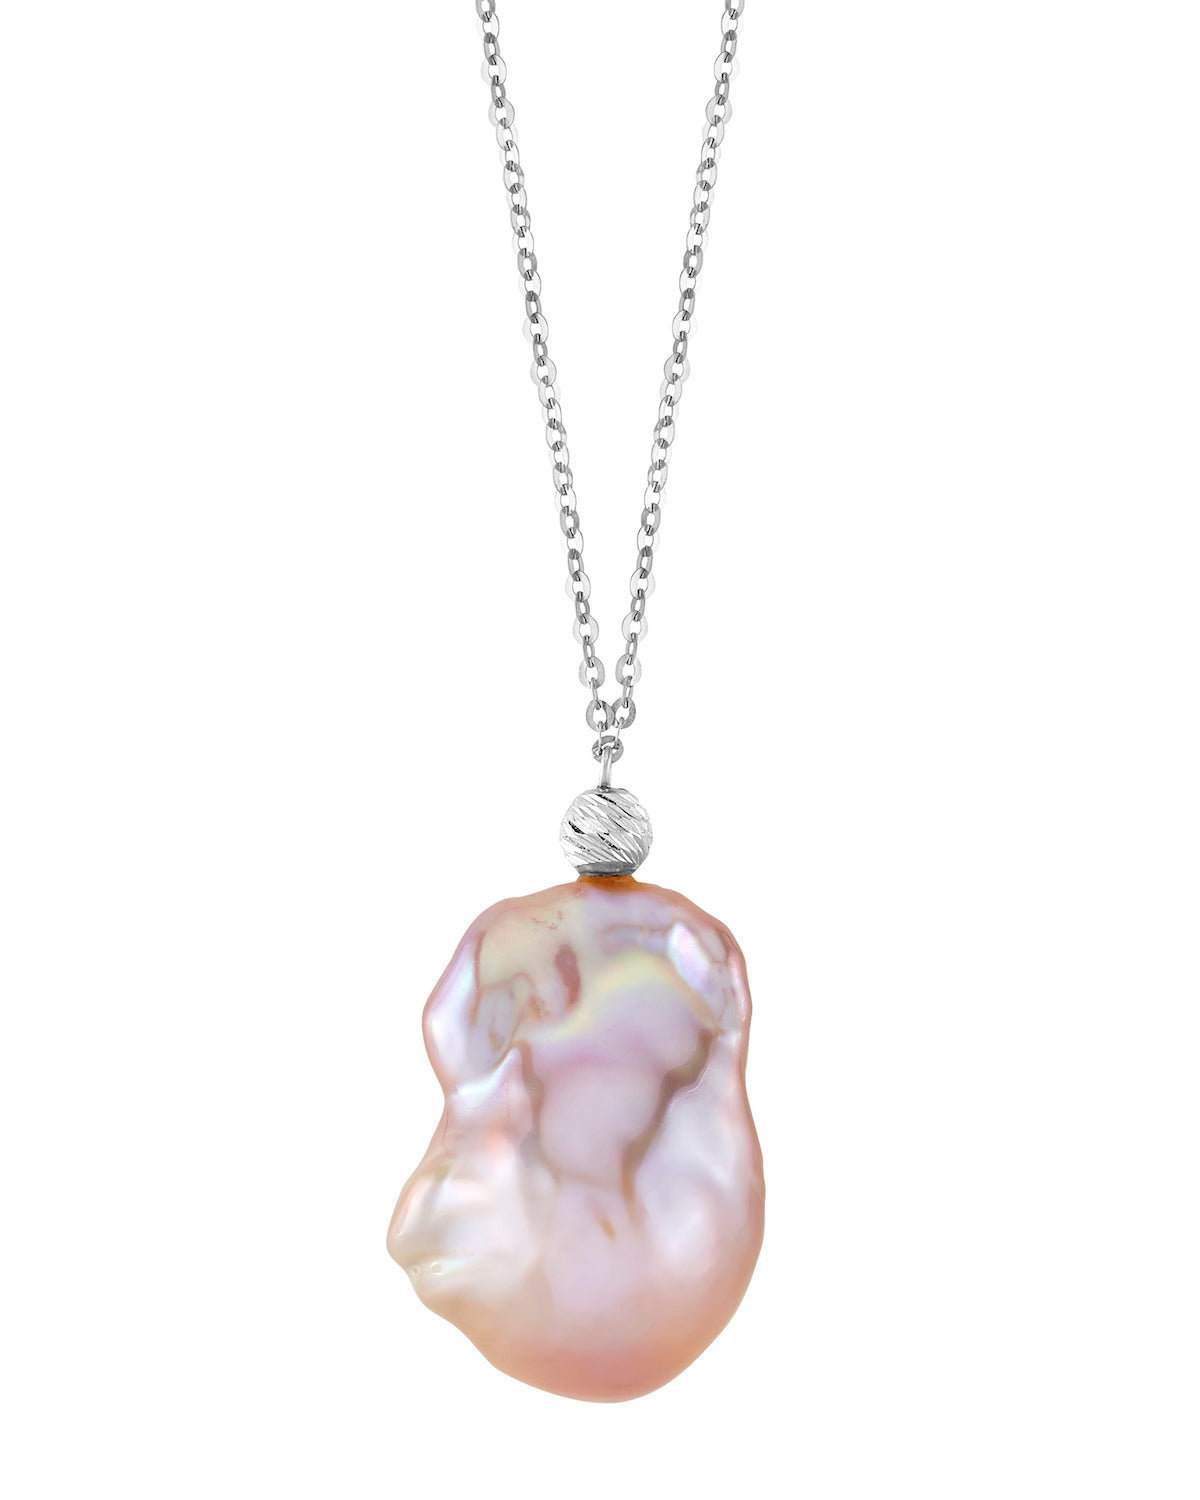 15mm Pink Freshwater Baroque Pearl Solitaire Designer Pendant